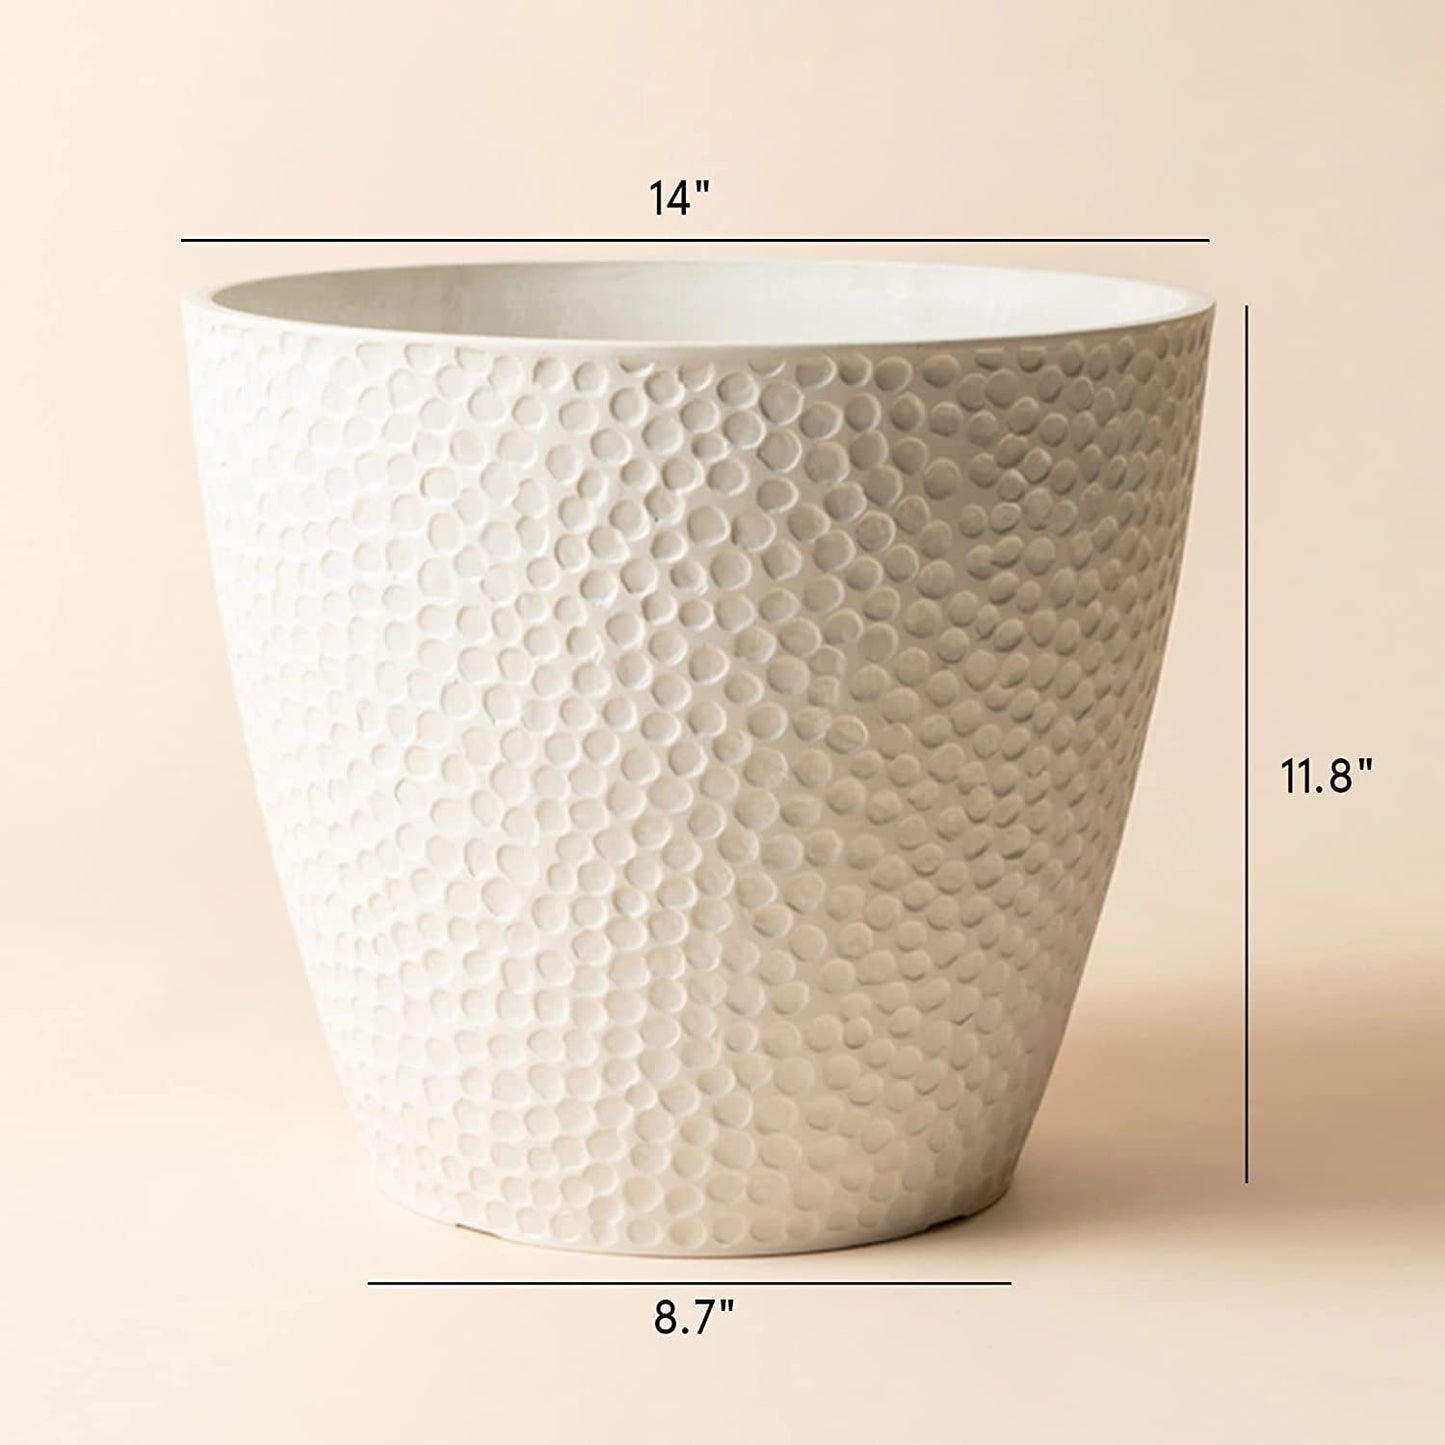 " 14 Inch Large Outdoor Indoor Tree Planters - Modern Decorative White Plant Pot for House Plants, Honeycomb Design"